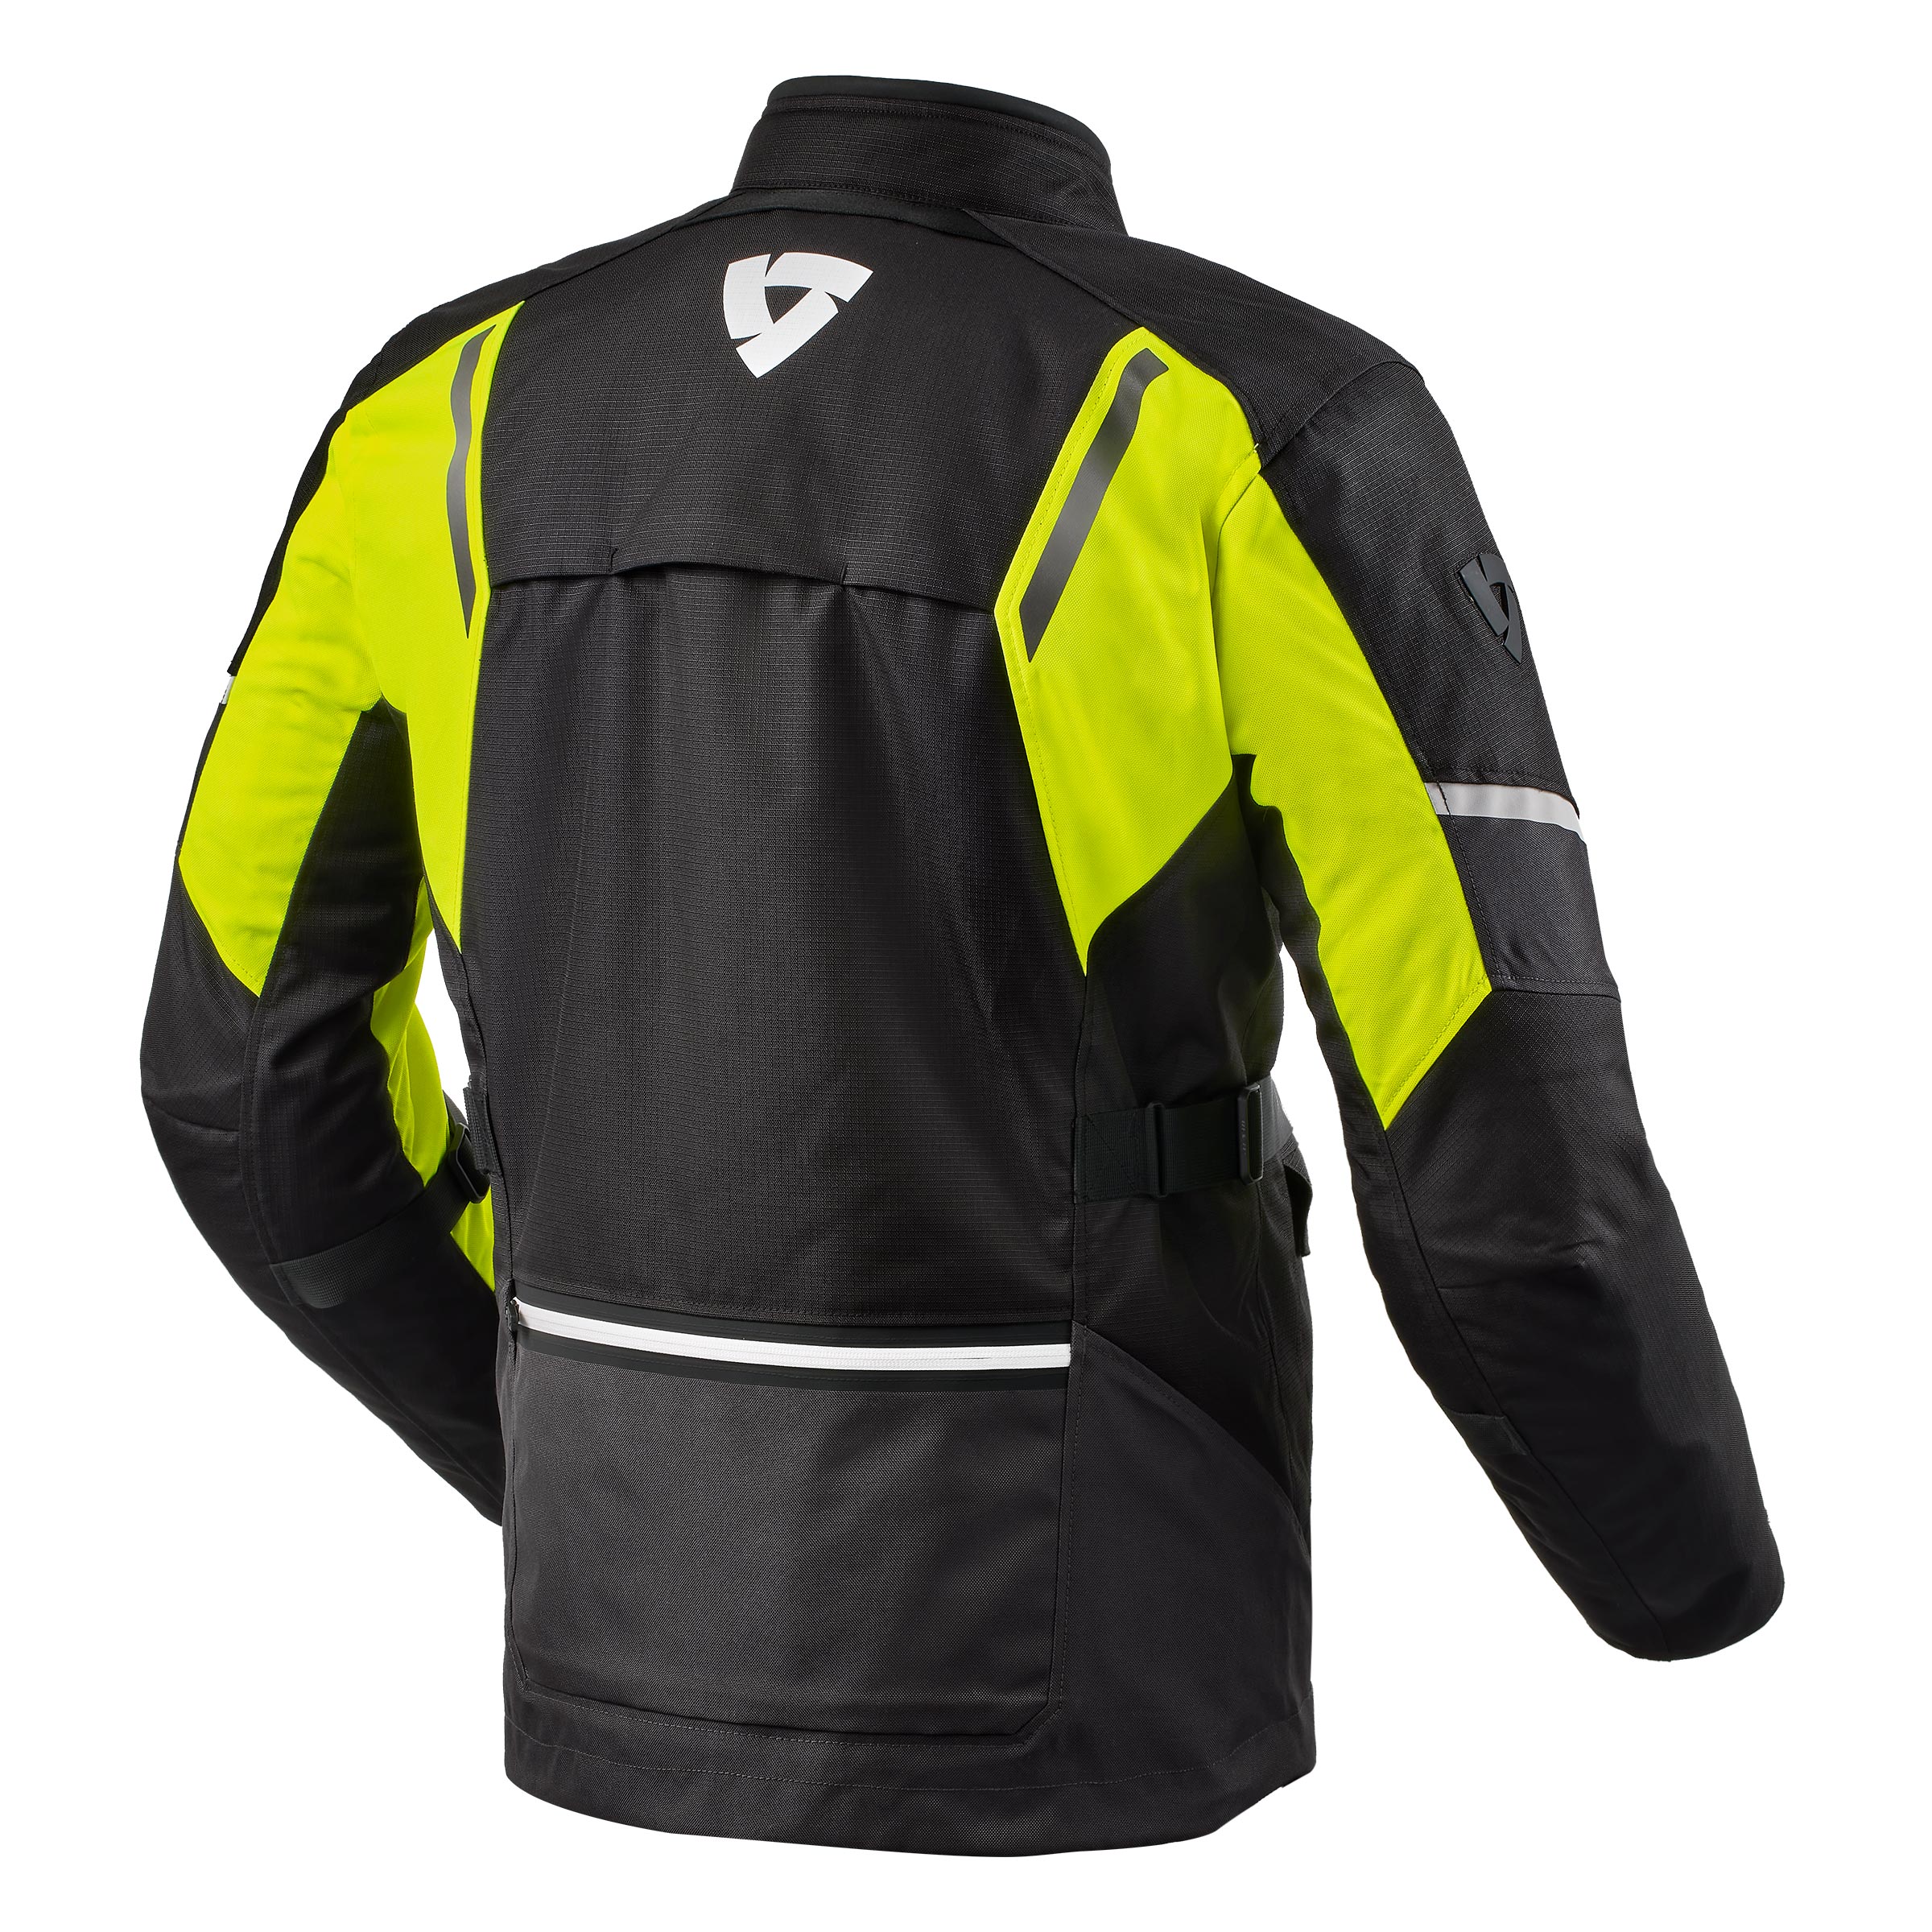 Viewing Images For REV'IT! Move H2O Jacket (Sold Out) :: MotorcycleGear.com